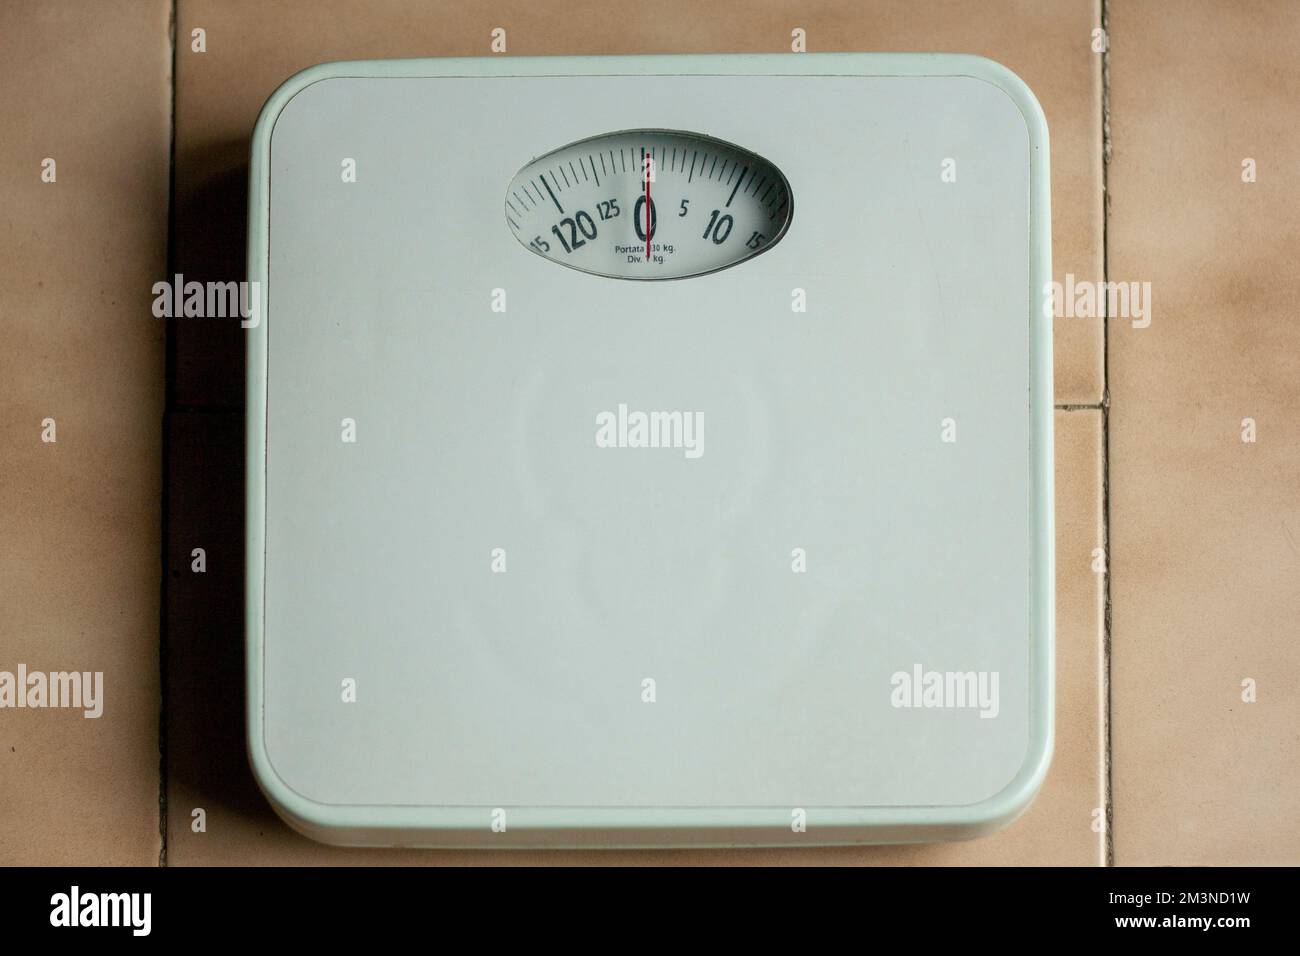 https://c8.alamy.com/comp/2M3ND1W/analog-scale-where-a-person-is-weighed-and-its-weight-can-be-seen-in-kg-2M3ND1W.jpg